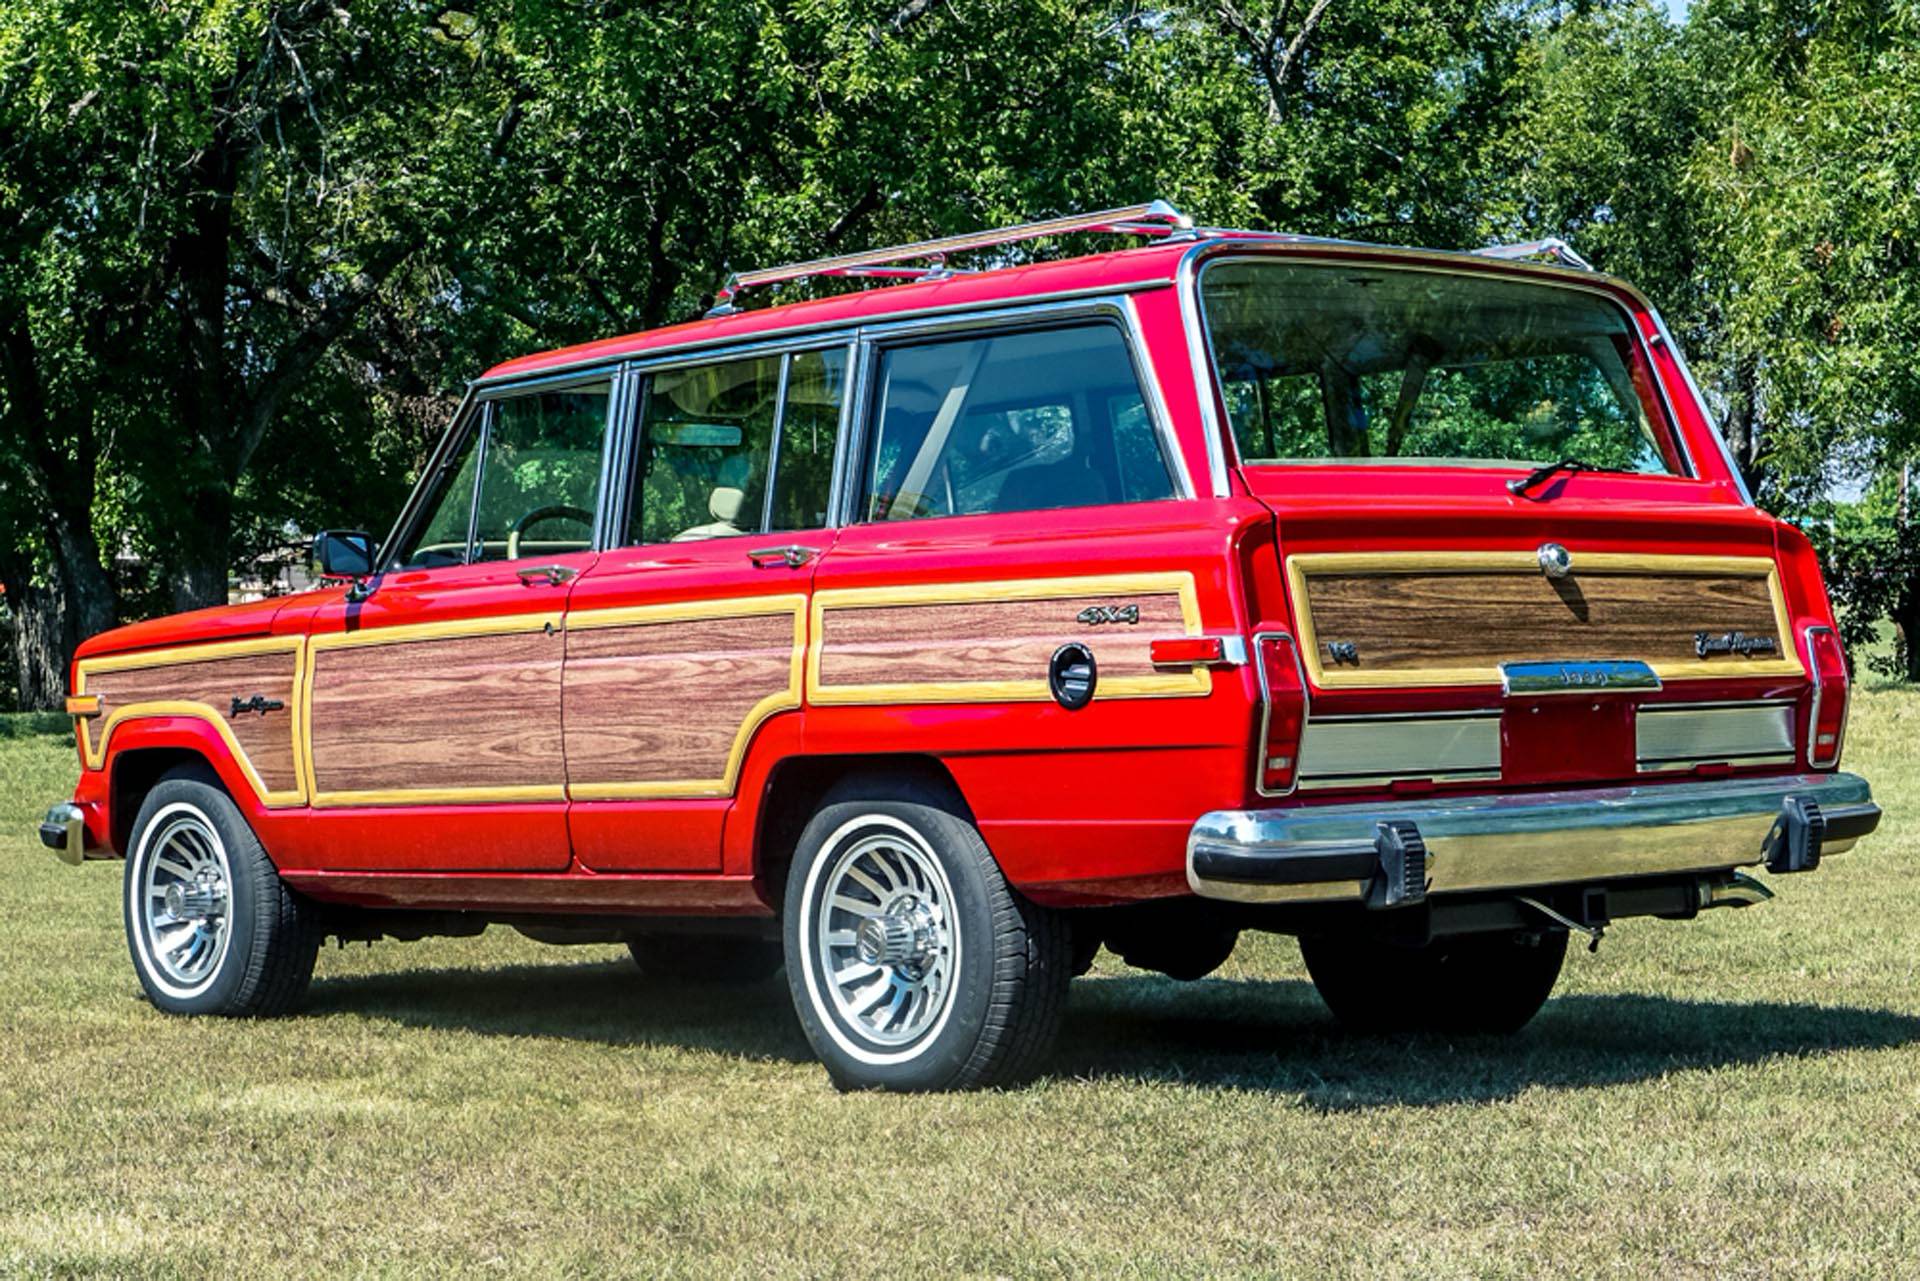 1989 Jeep Grand Wagoneer Woody Looks All Original But Hides